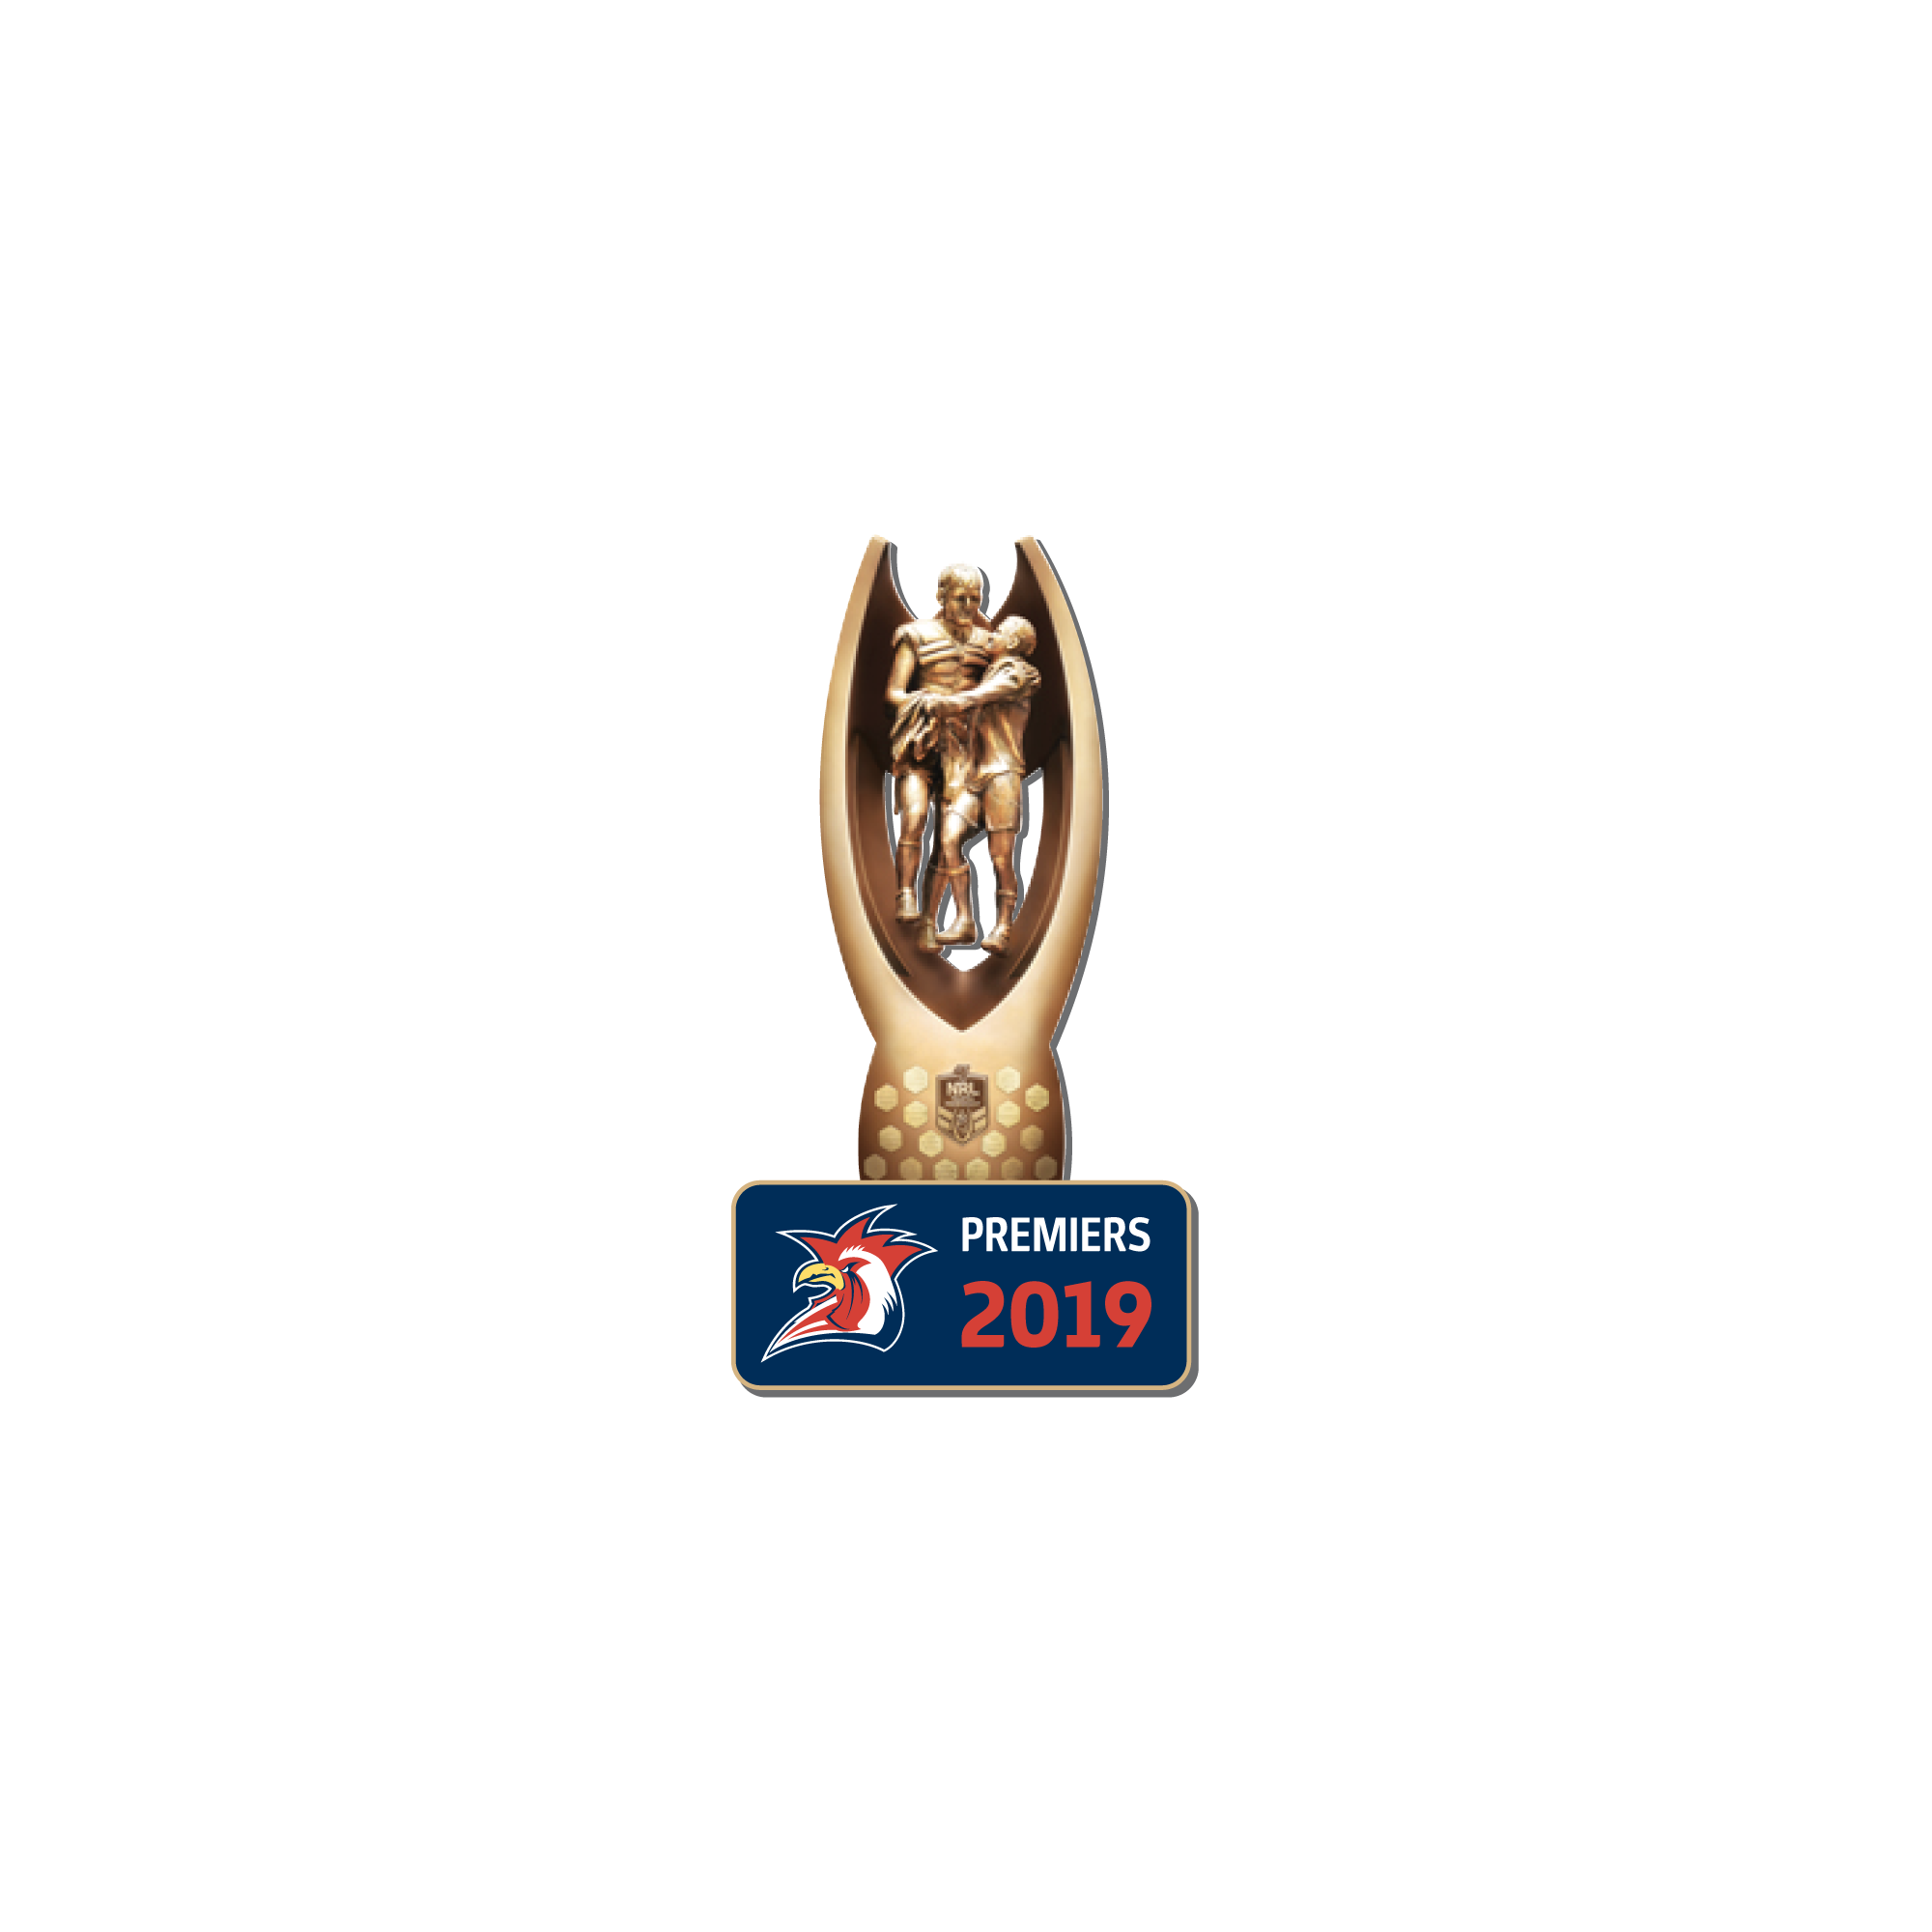 Sydney Roosters 2019 Premiers Trophy Pin